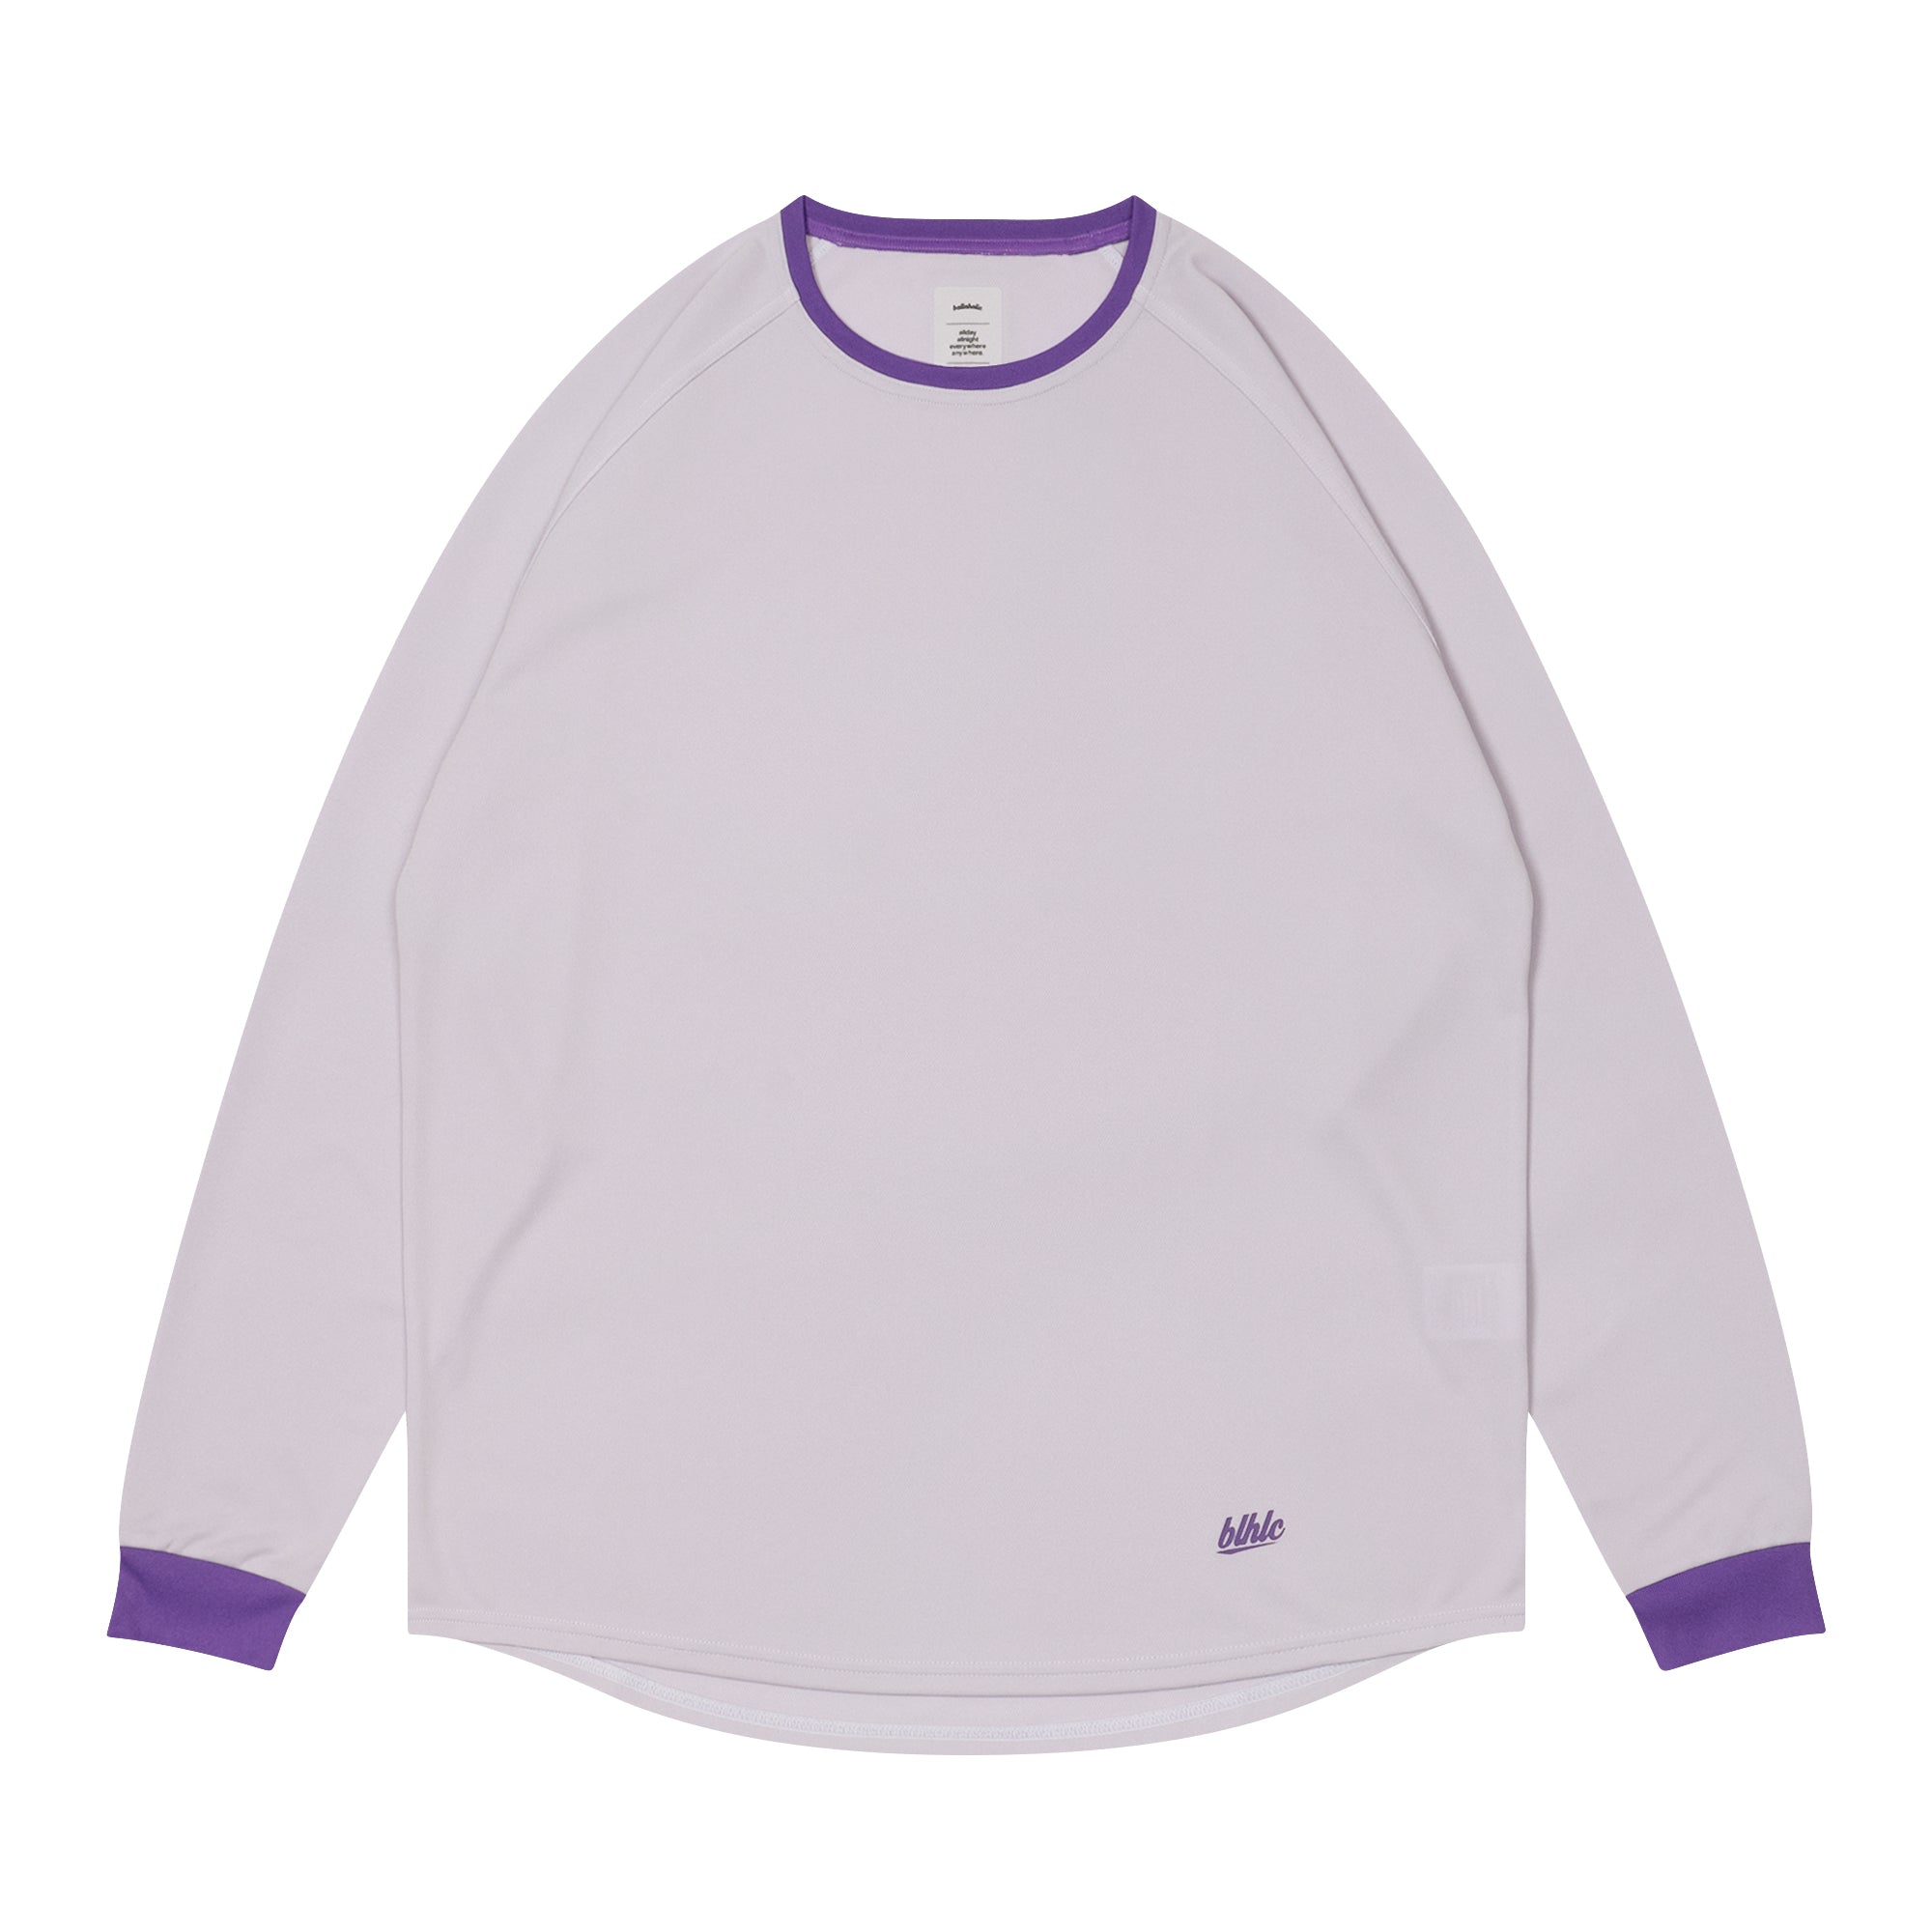 blhlc Cool Long Tee (lavender) – ballaholic